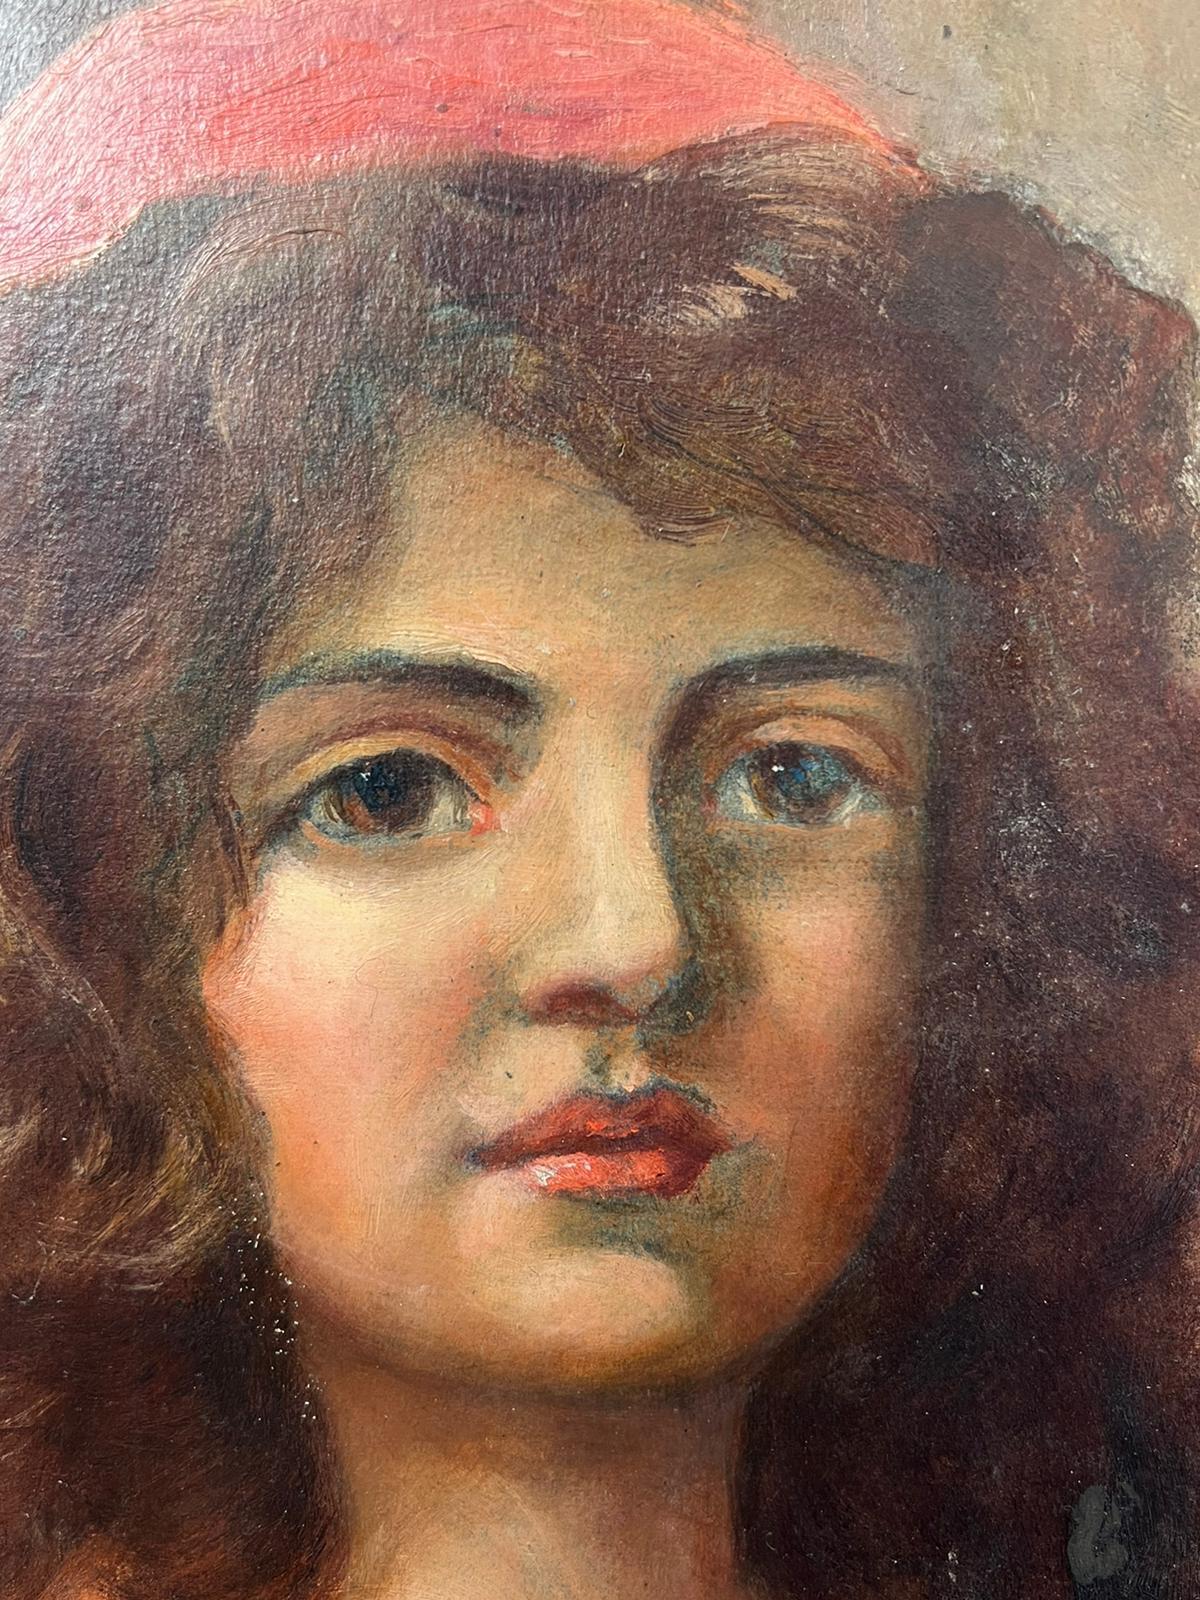 Artist/ School: English School, late 19th/ early 20th century.
The painting came from a large collection of works by one artist. A very few of them are signed what looks to be 'F. Wardle'. 

Title: Portrait

Medium: oil on board , unframed

Size: